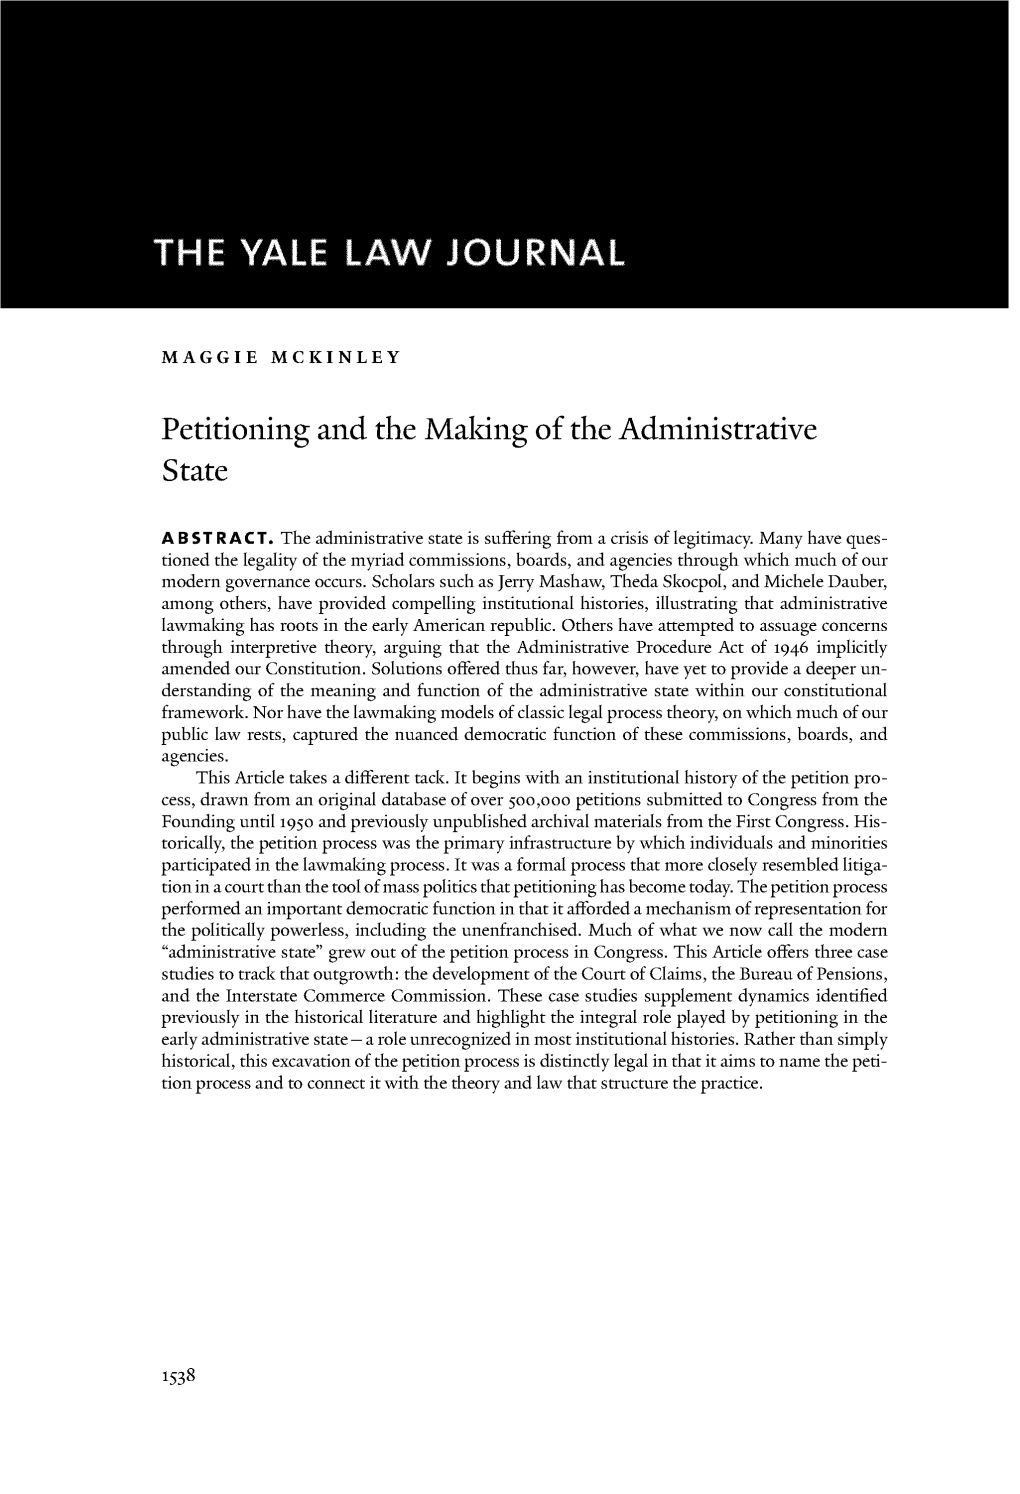 Petitioning and the Making of the Administrative State